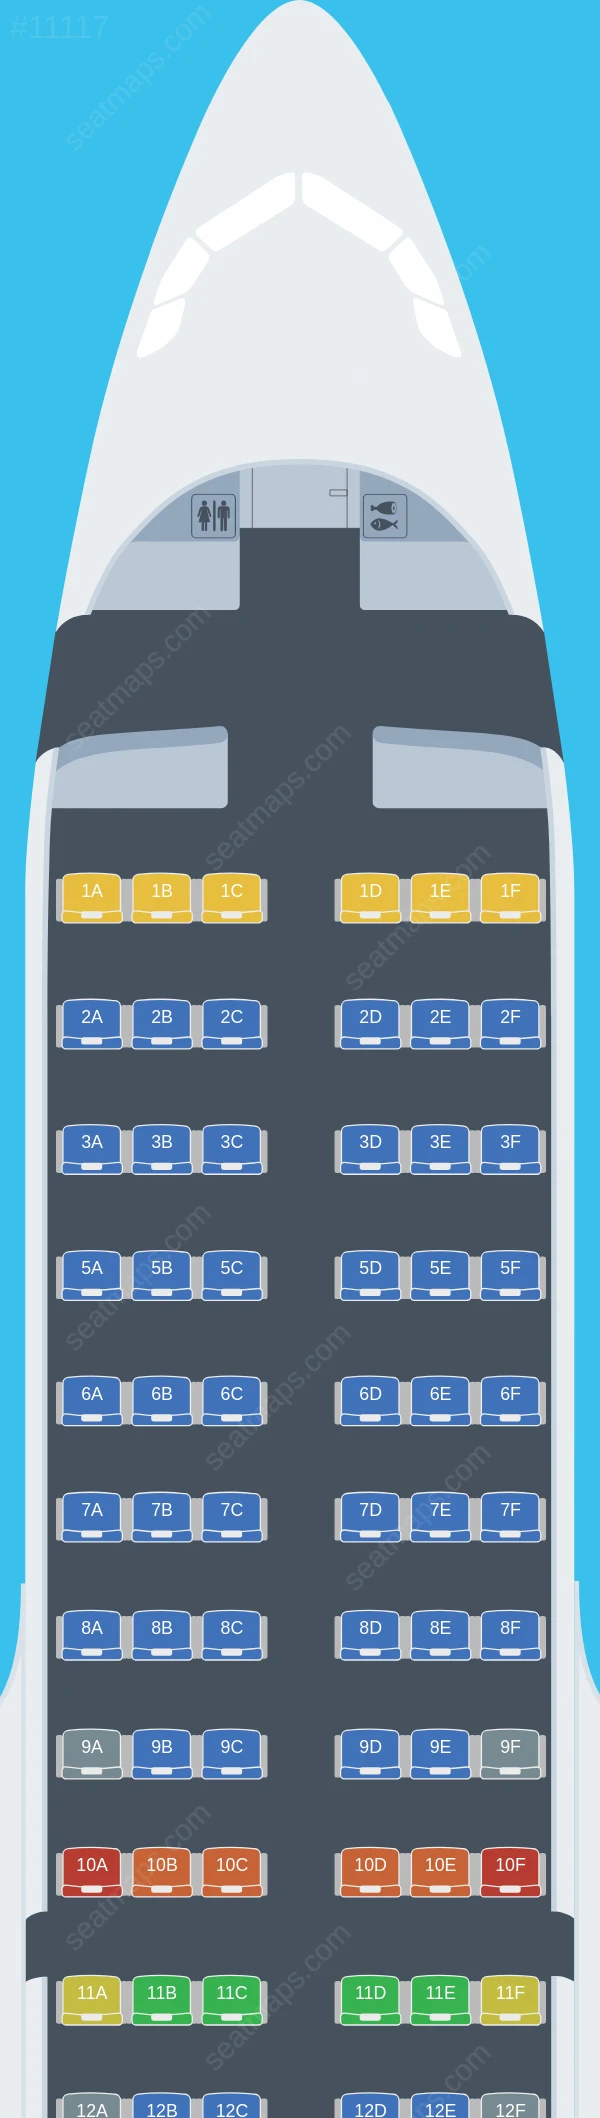 StarFlyer Airbus A320-200 V.1 seatmap preview